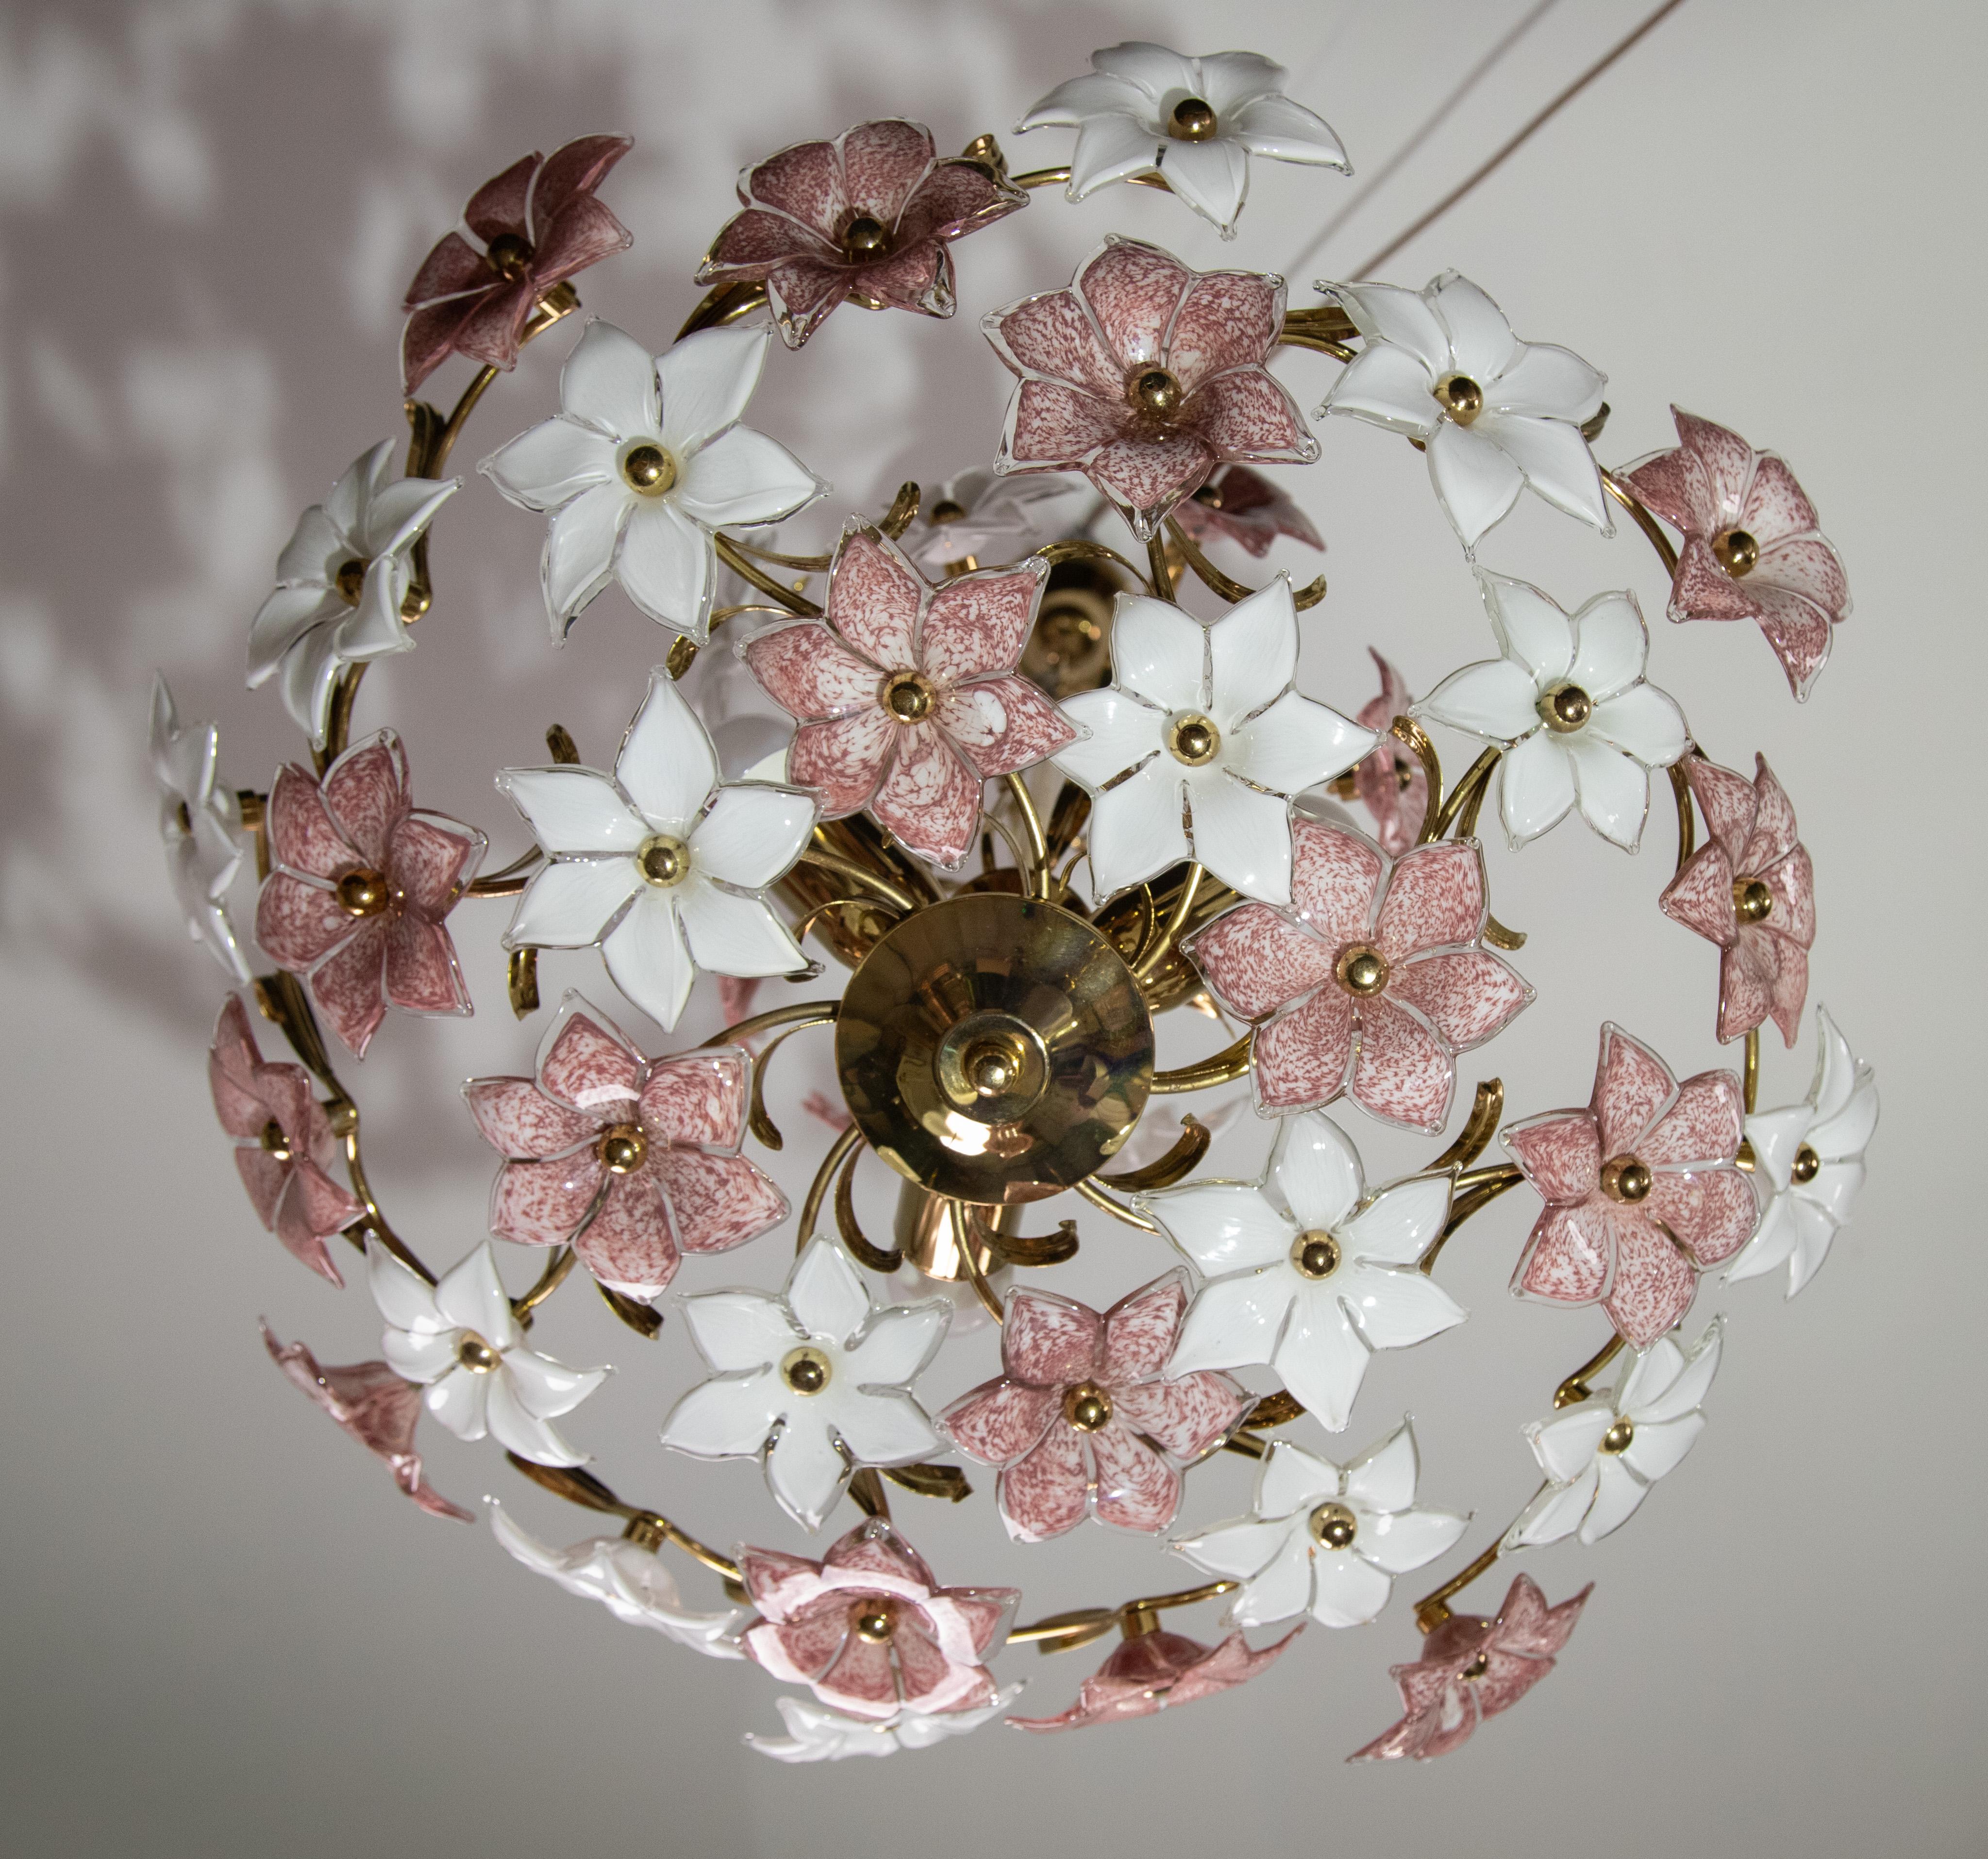 Spectacular Murano Chandelier Full of Pink and White Flowers, 1980s For Sale 6